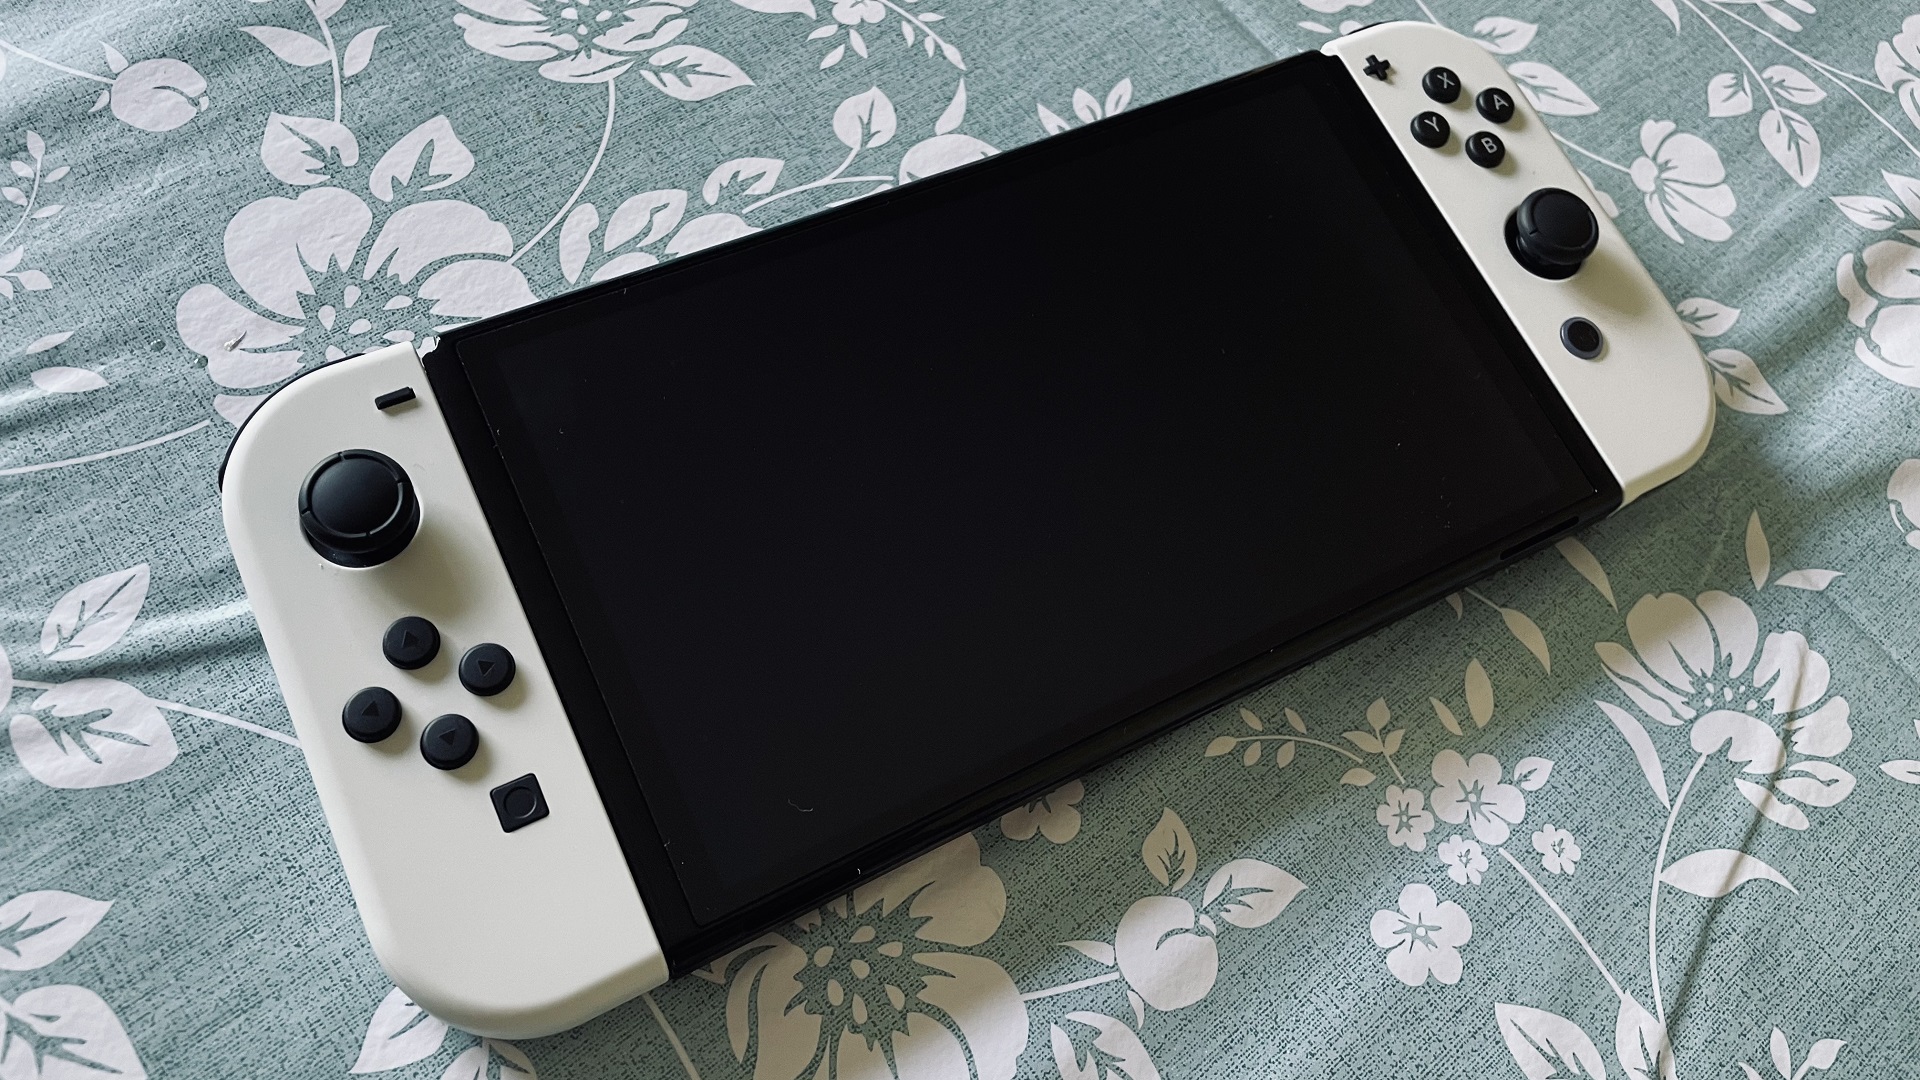 Nintendo Switch OLED model review: Screen and battery worth the cost